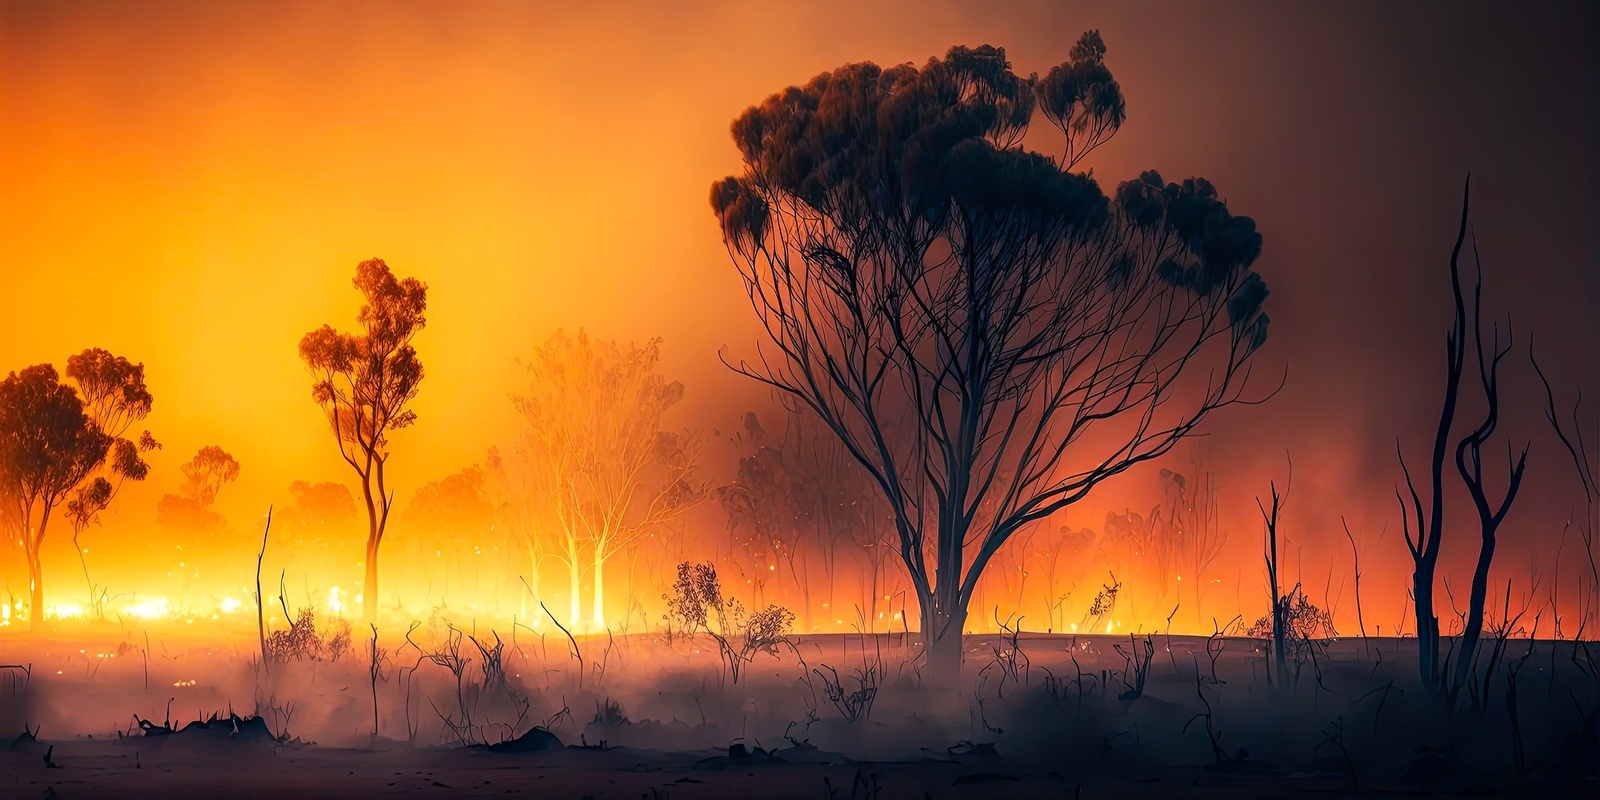 Burning Innovations: The developments and future of bushfire research